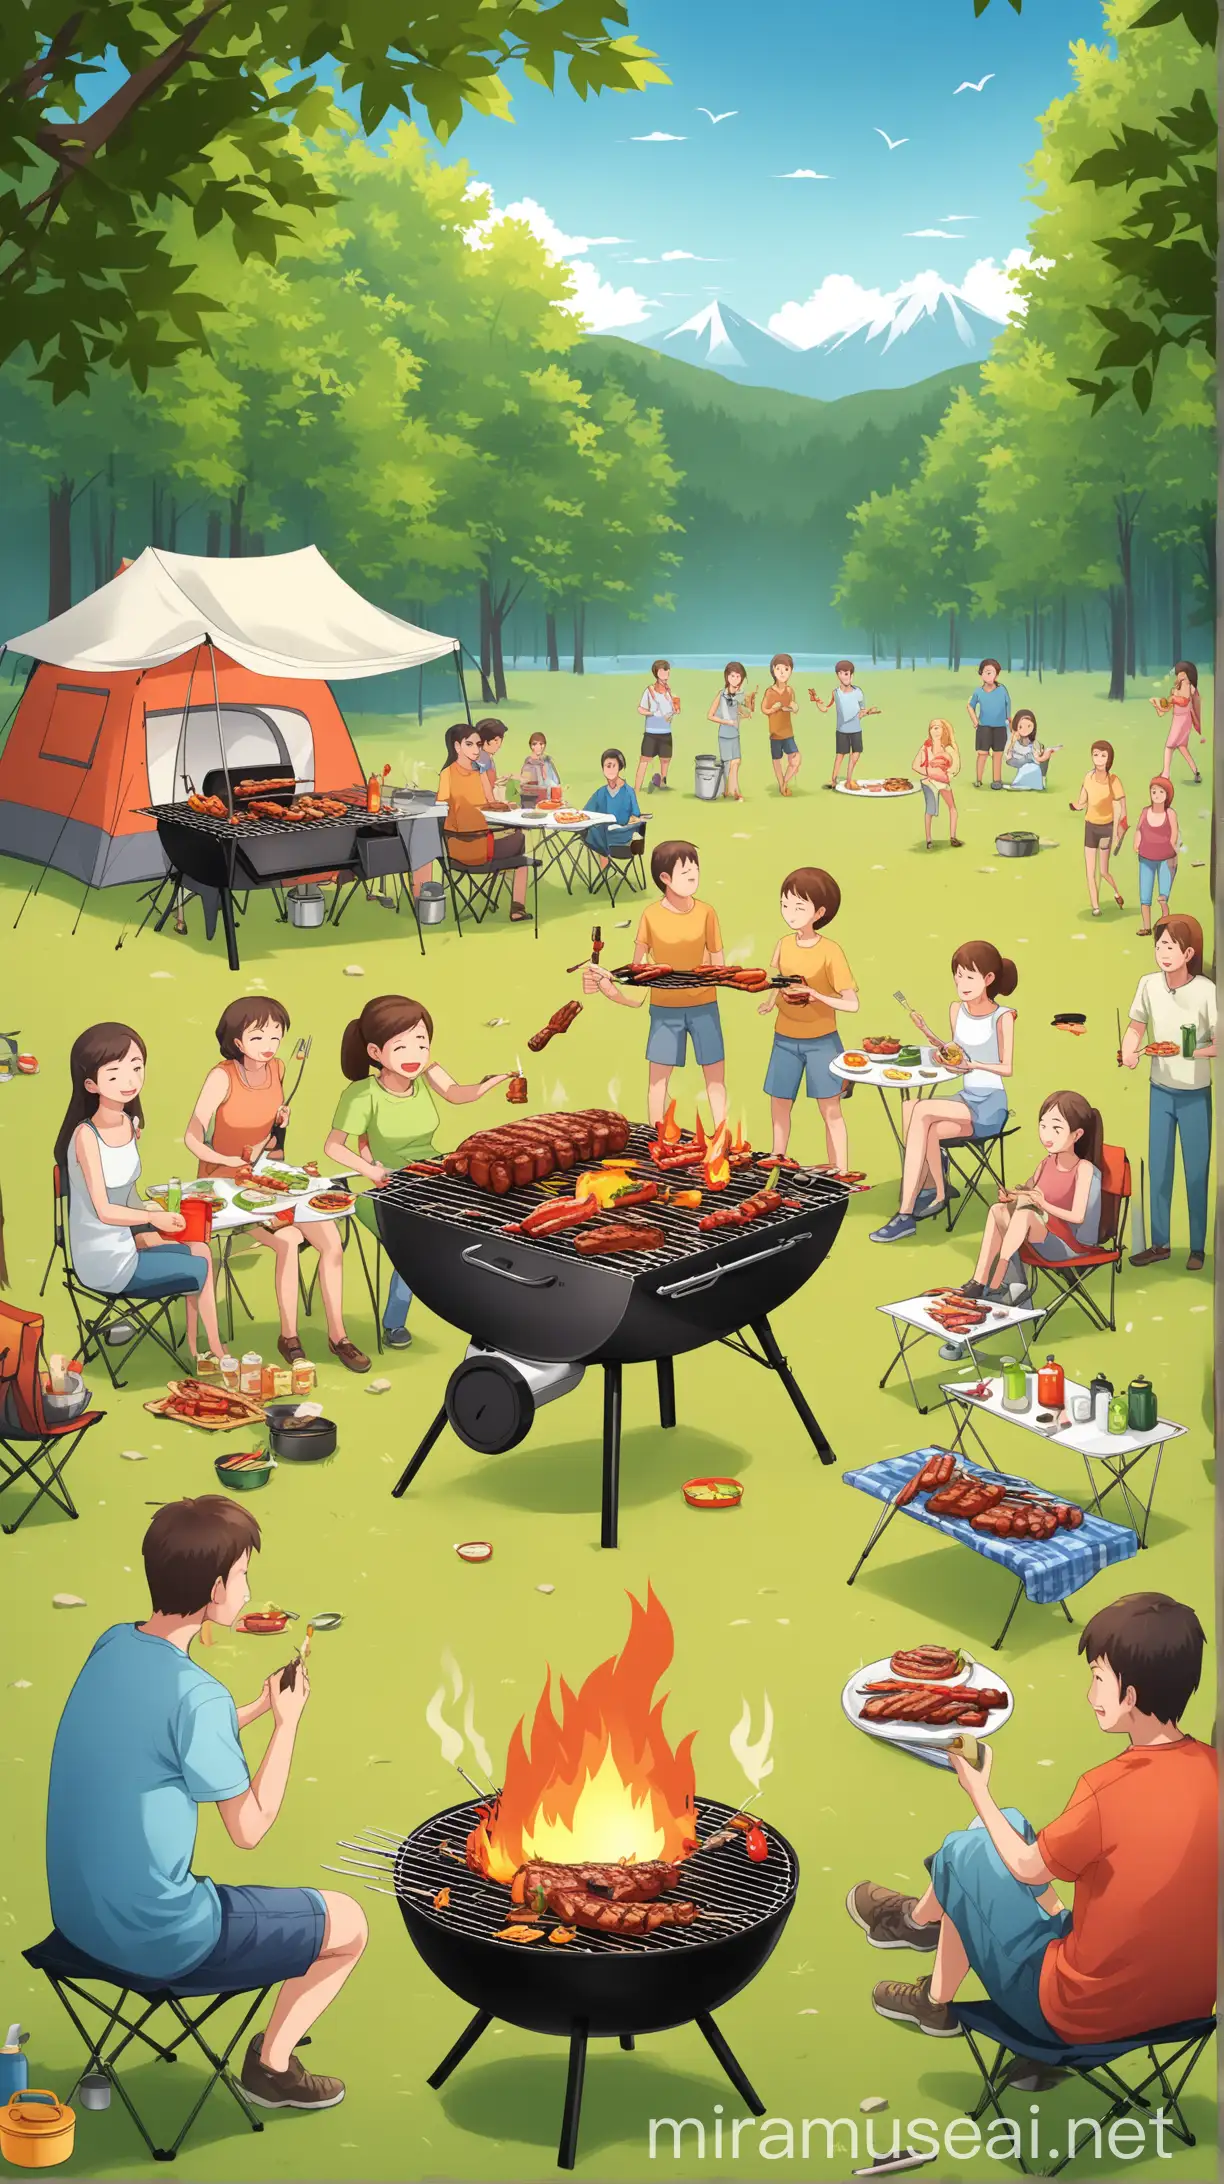 Lively Outdoor Camping Barbecue Scene with People Enjoying Grilled Delicacies